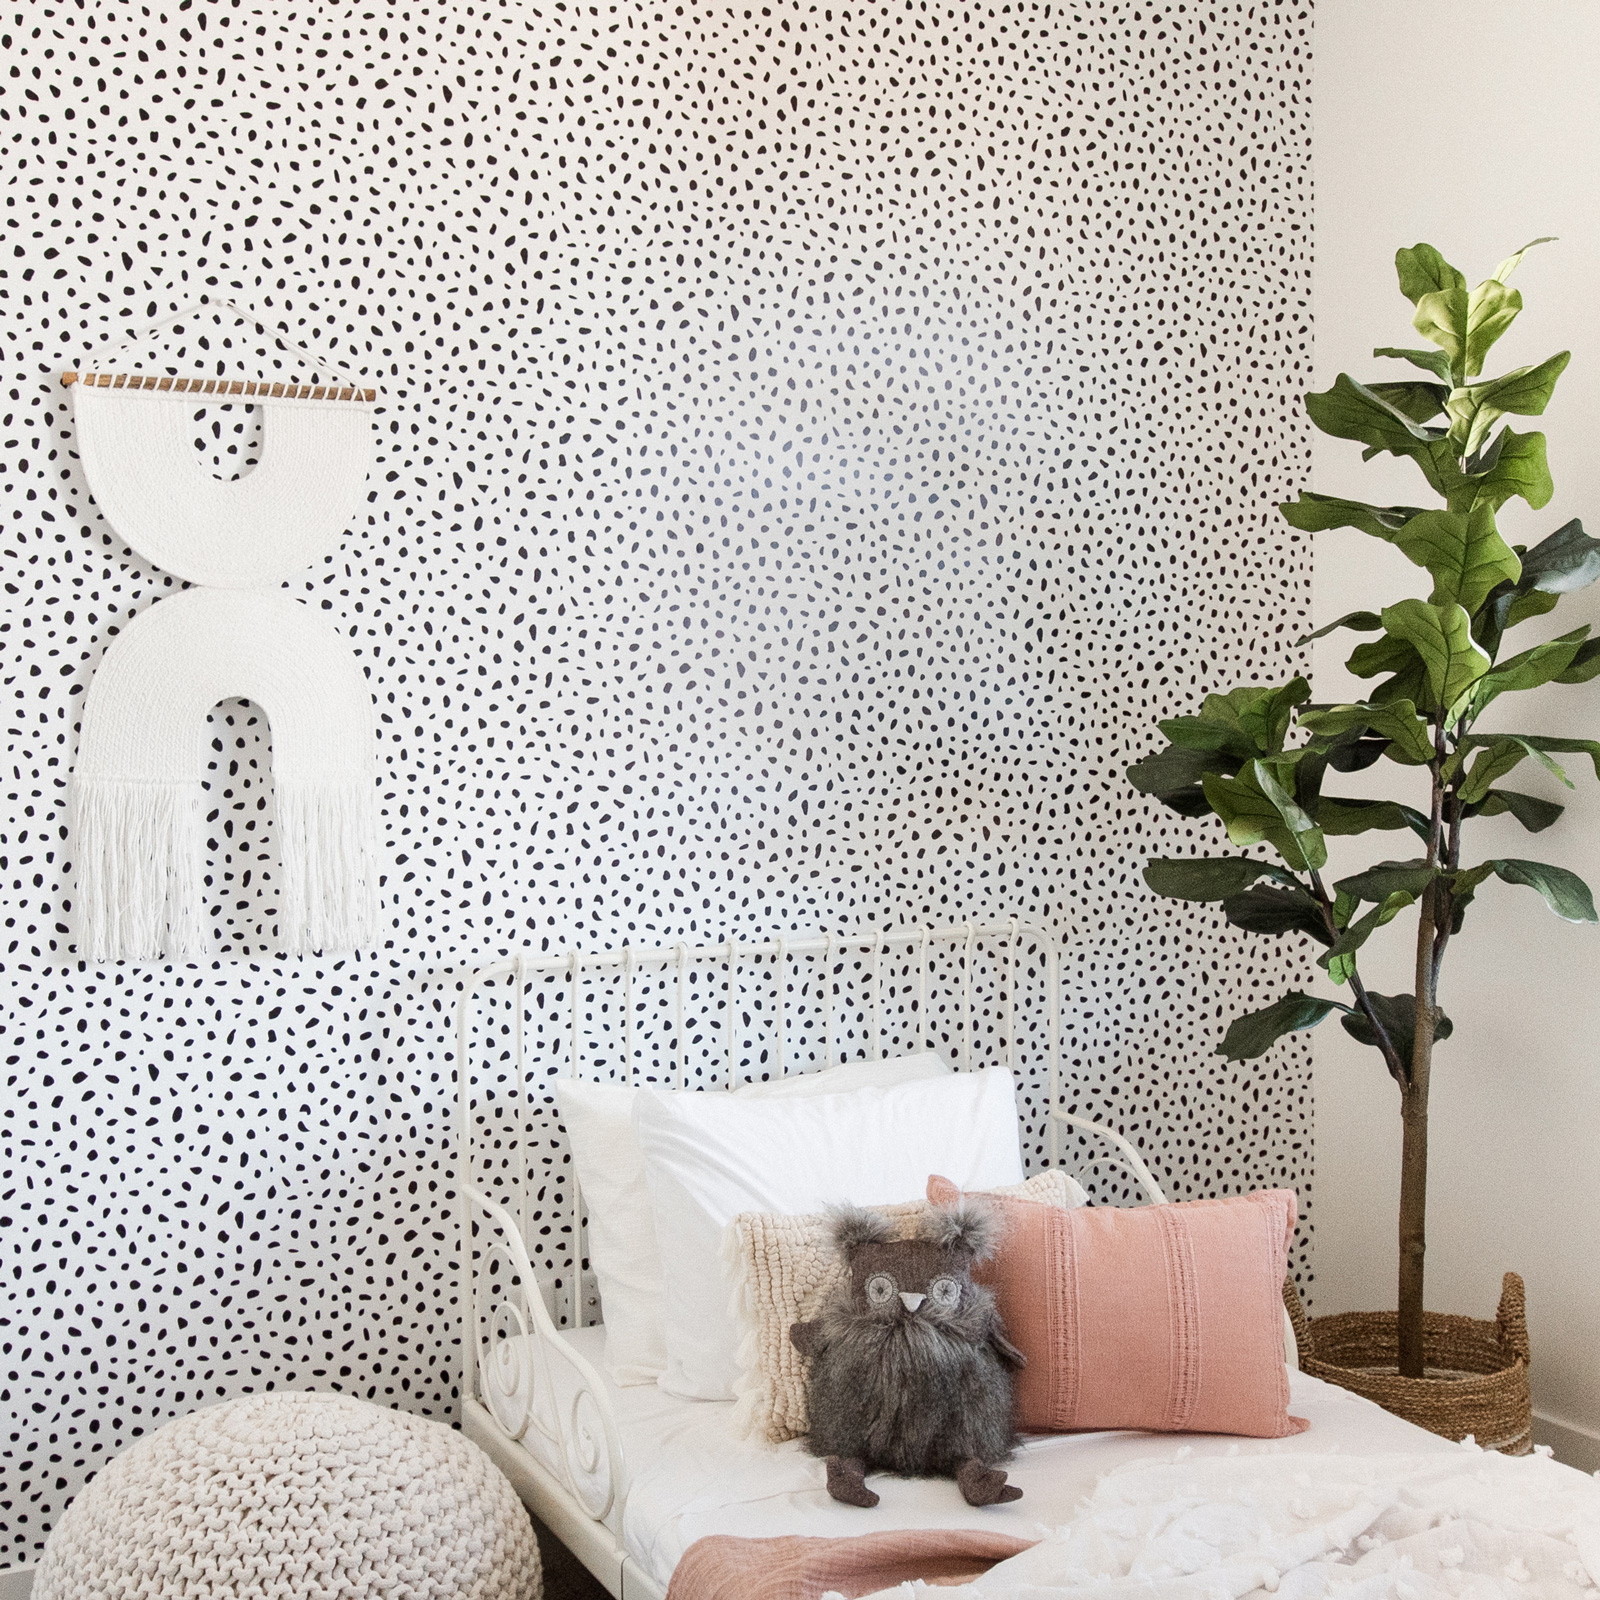 how to pick an accent wall to paint